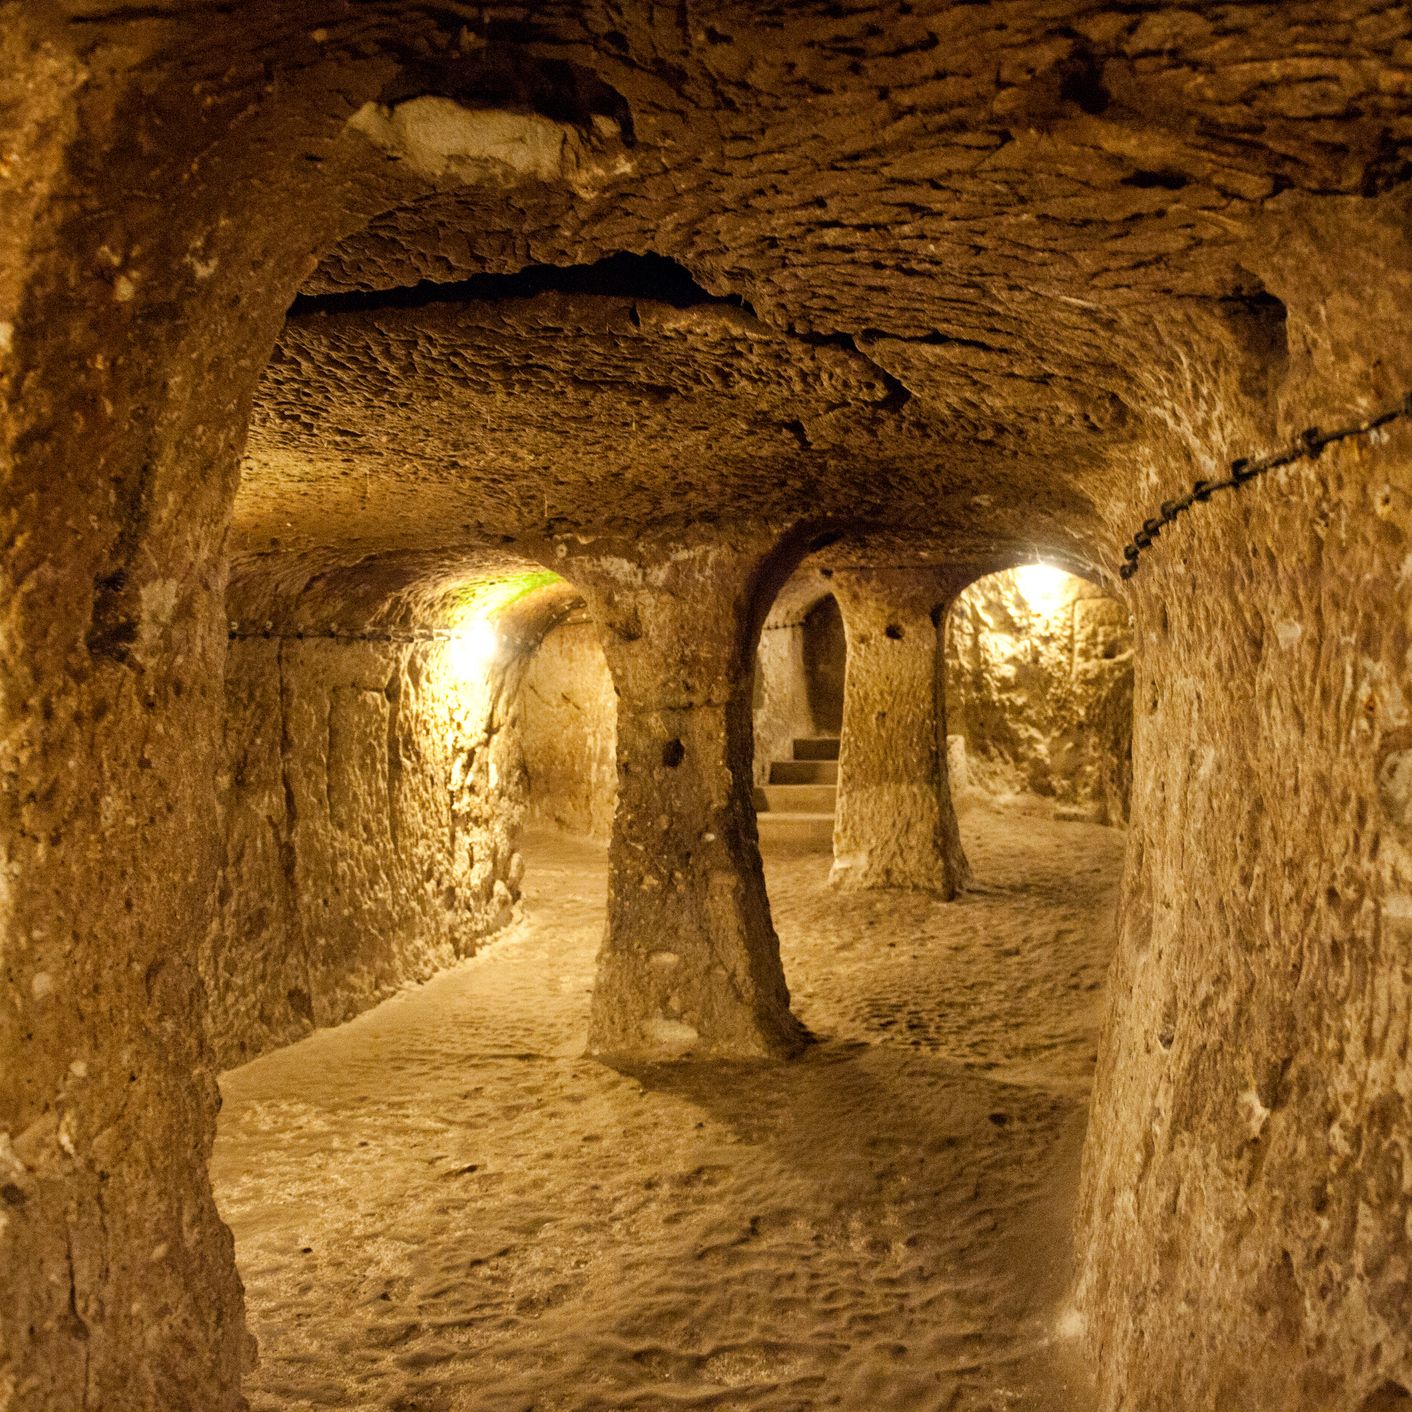 A Man Renovated His Home—and Found an Entire Ancient City Under His Basement